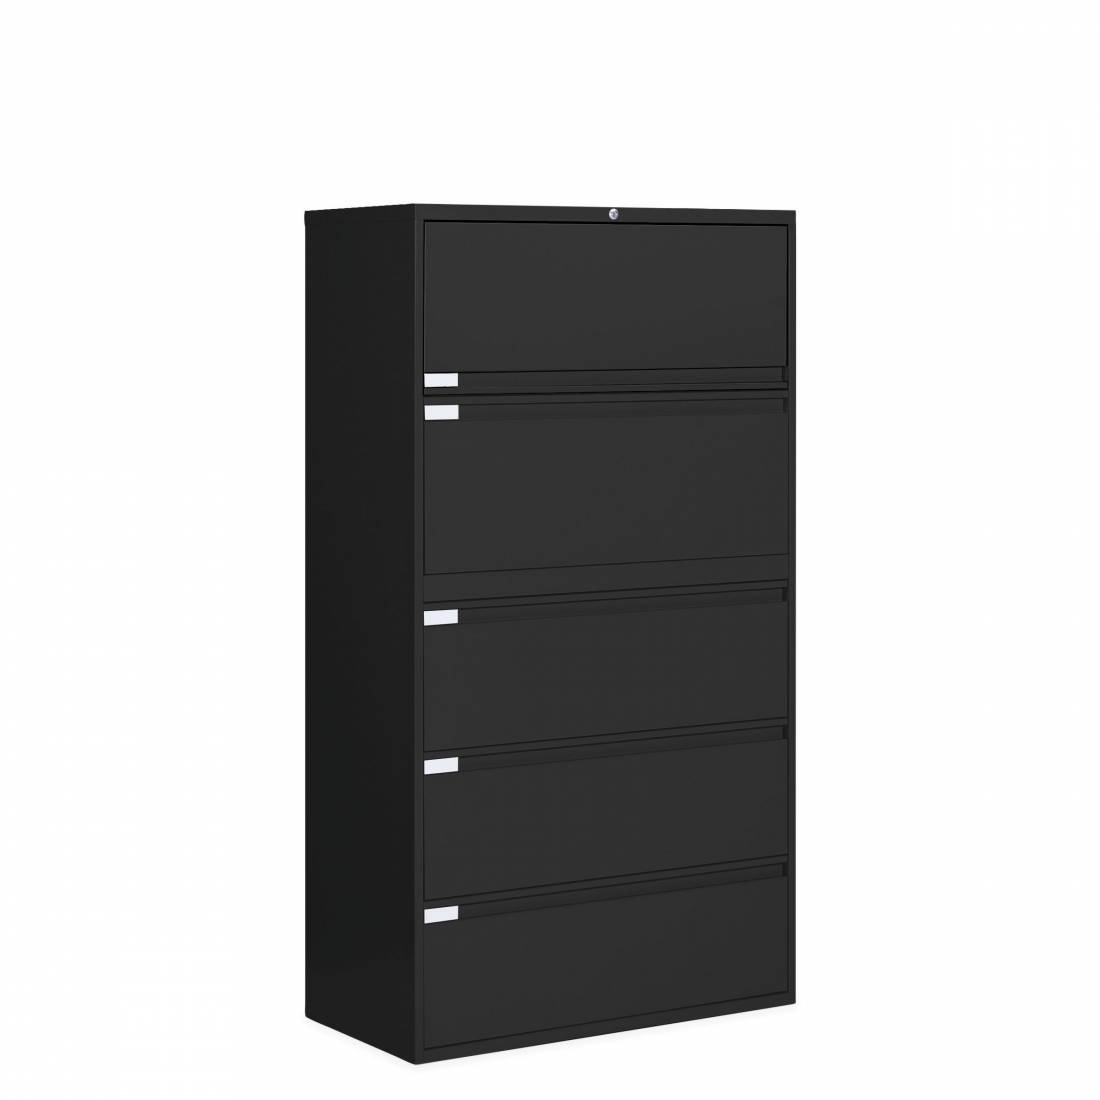 36”W 5 Drawer Lateral File